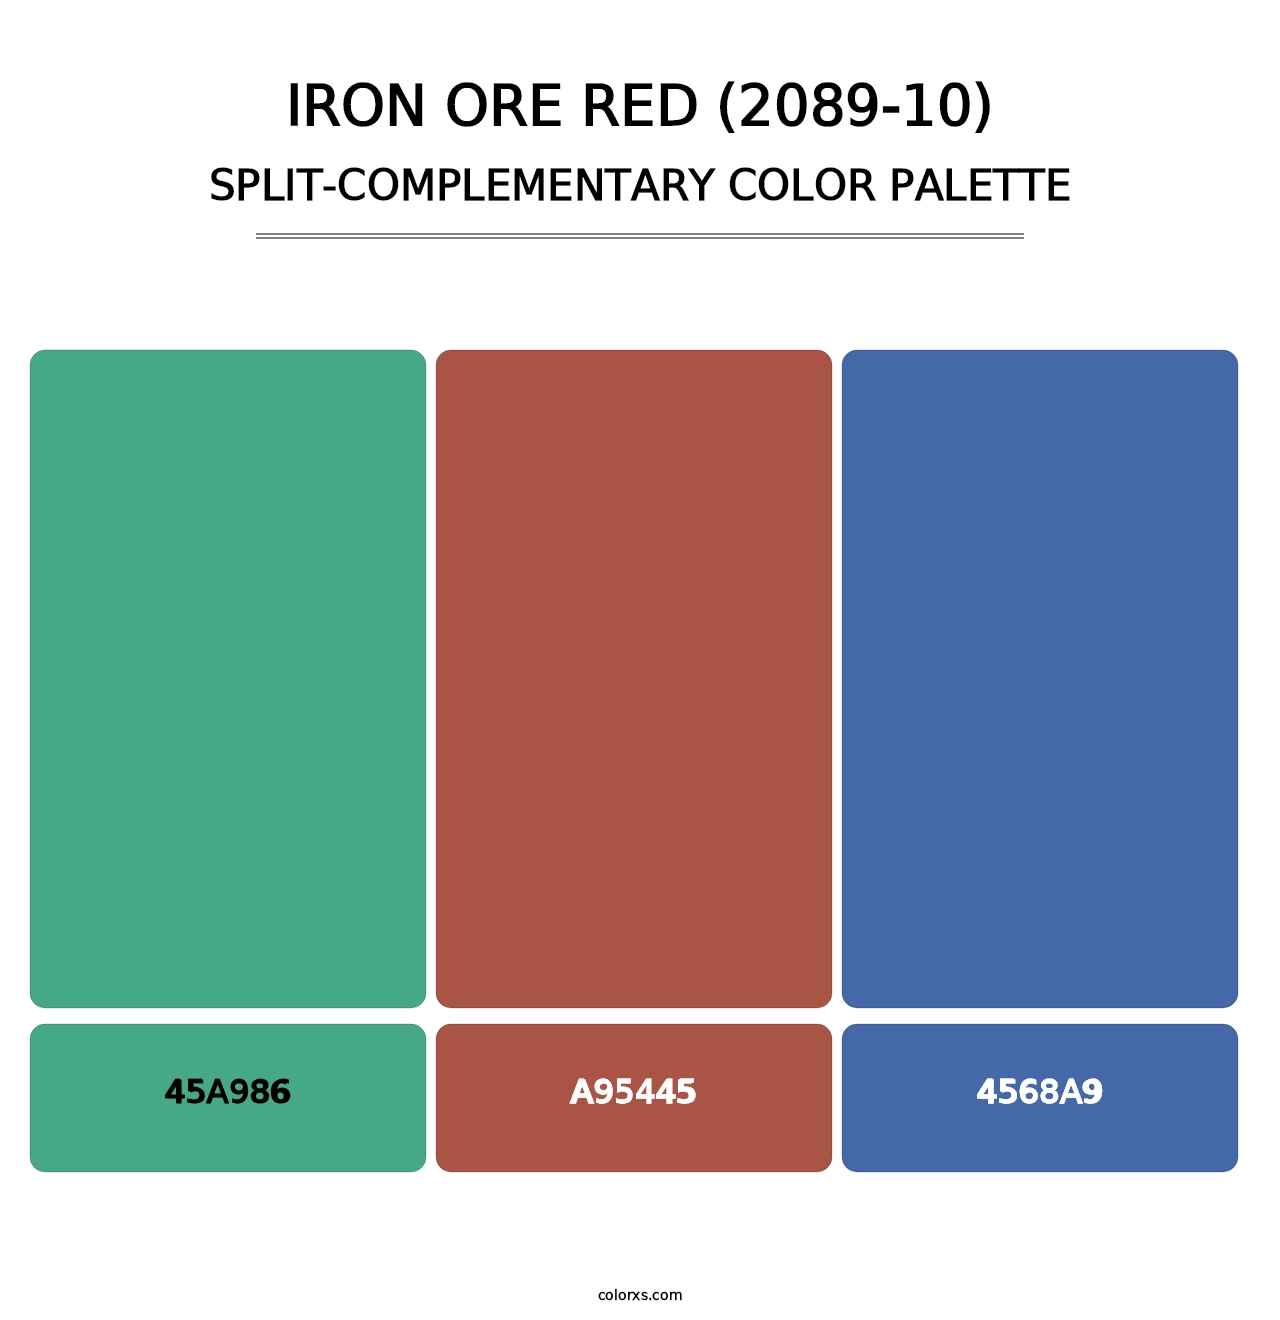 Iron Ore Red (2089-10) - Split-Complementary Color Palette